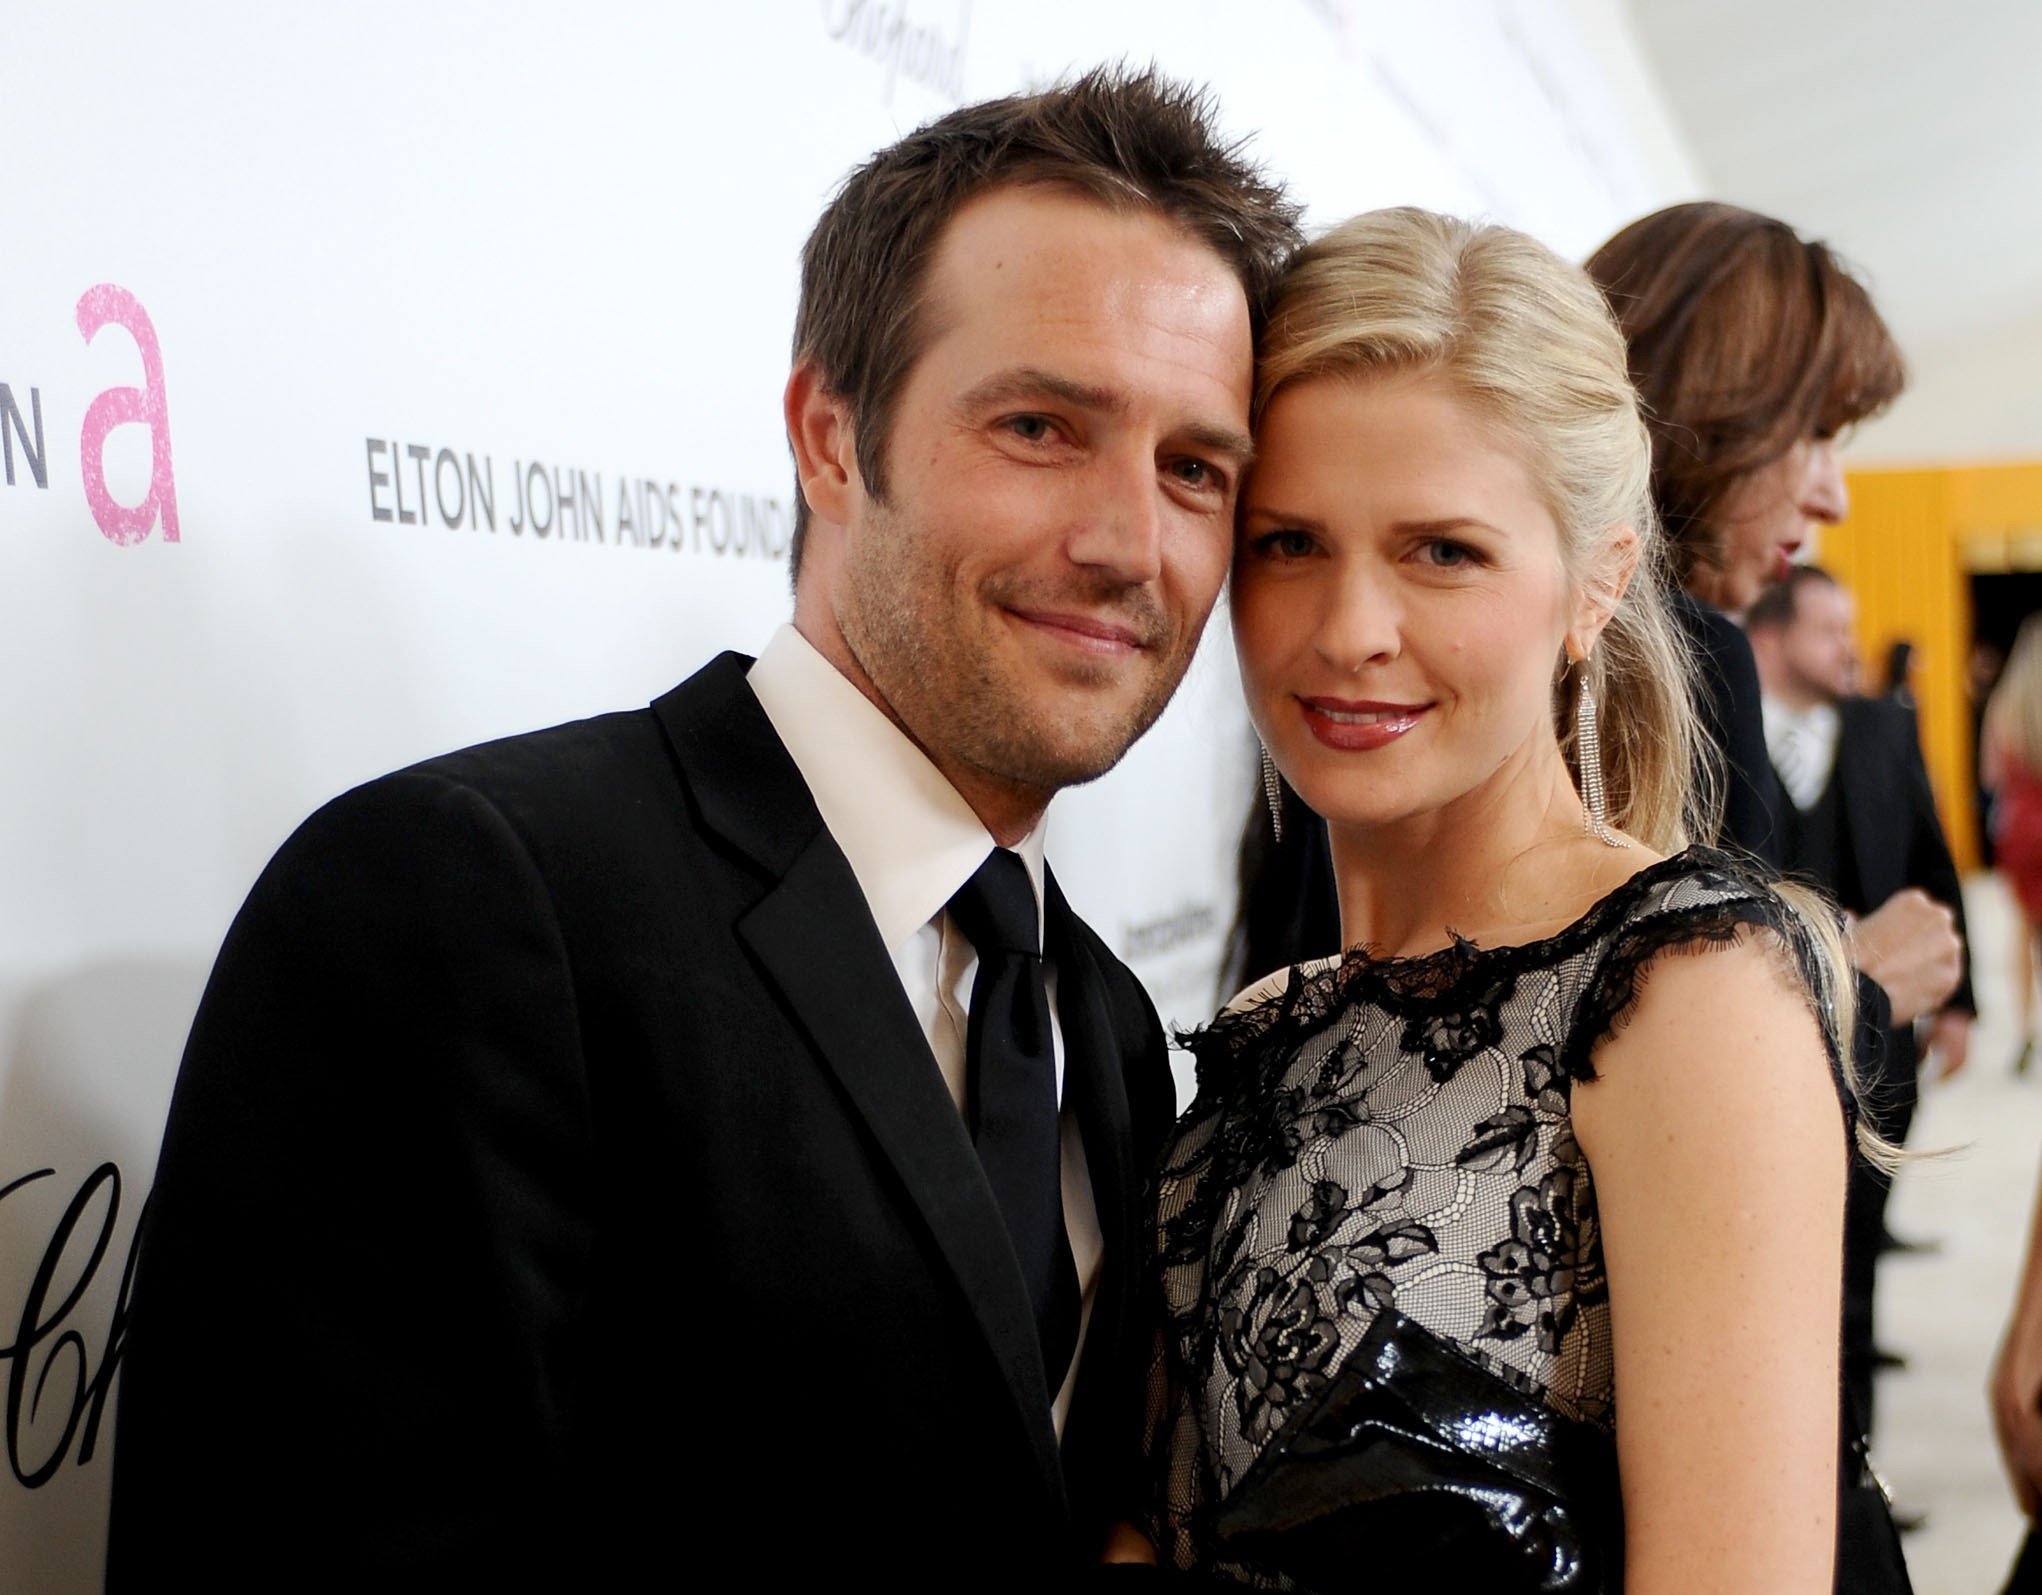 Michael Vartan and Lauren Skaar at the 19th Annual Elton John AIDS Foundation Academy Awards Viewing Party in 2011, in West Hollywood. | Source: Getty Images